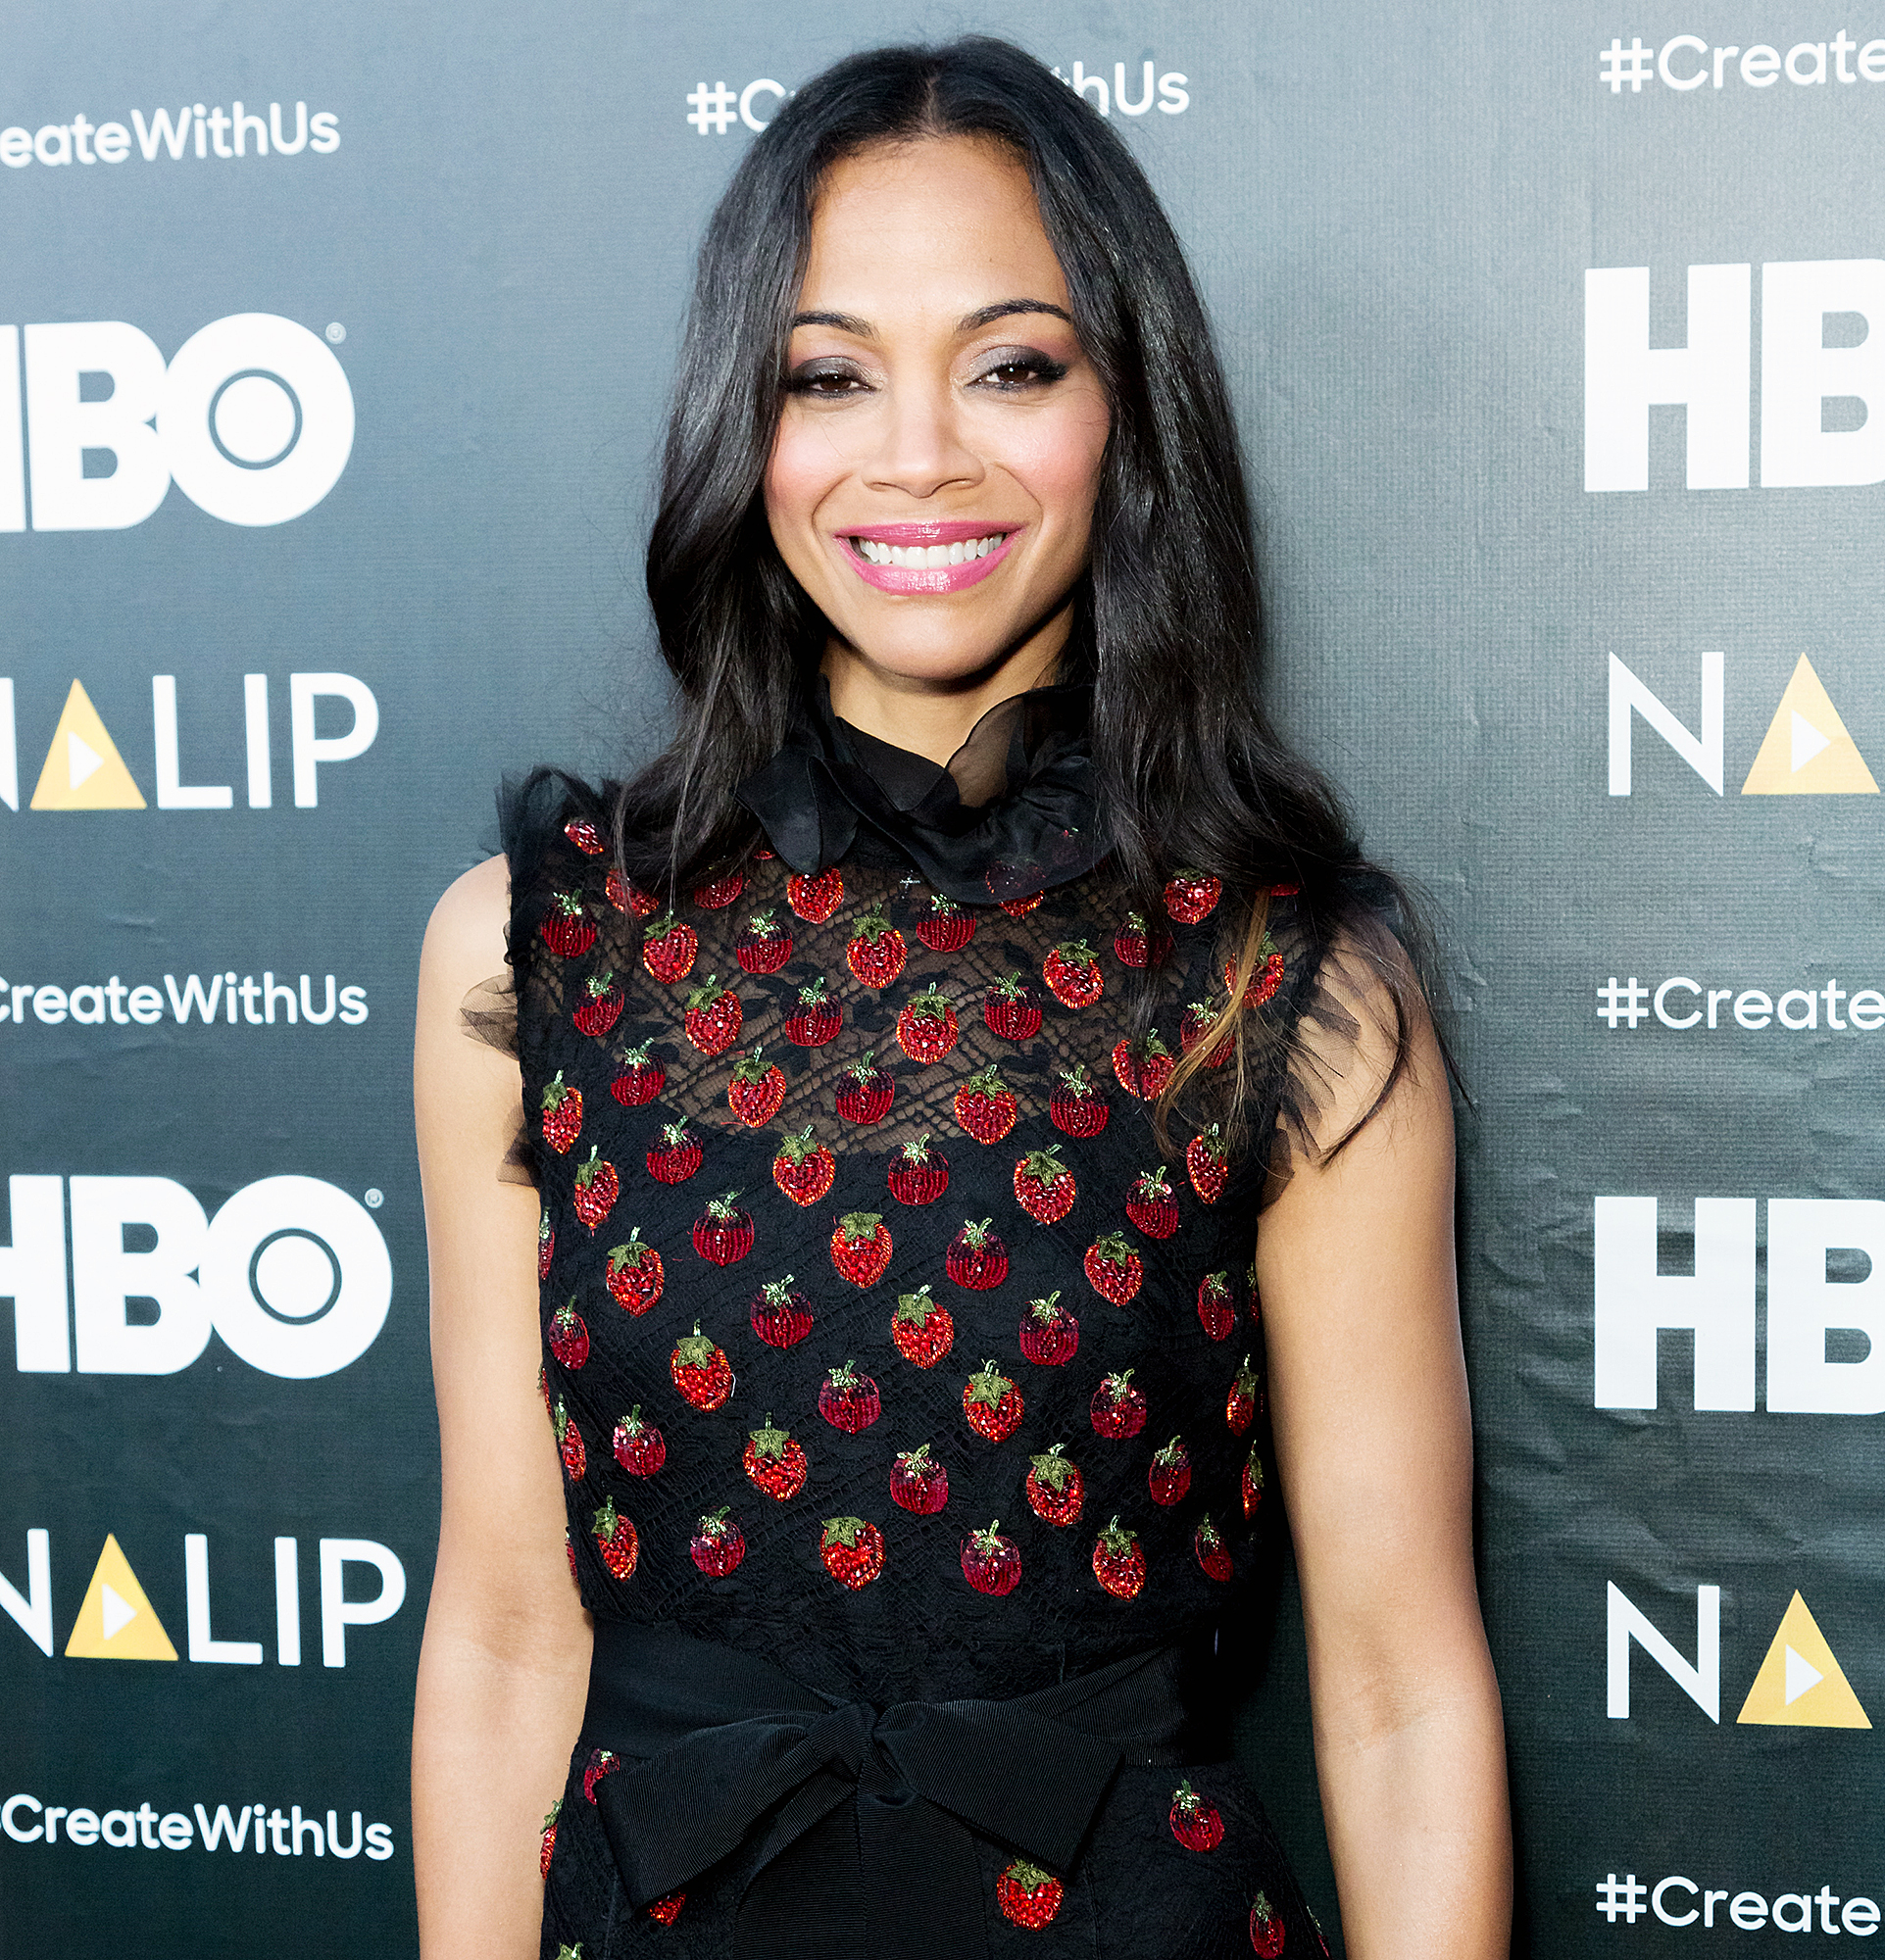 Walk of Fame Honoree Zoe Saldana Conquers the Galaxy and Beyond